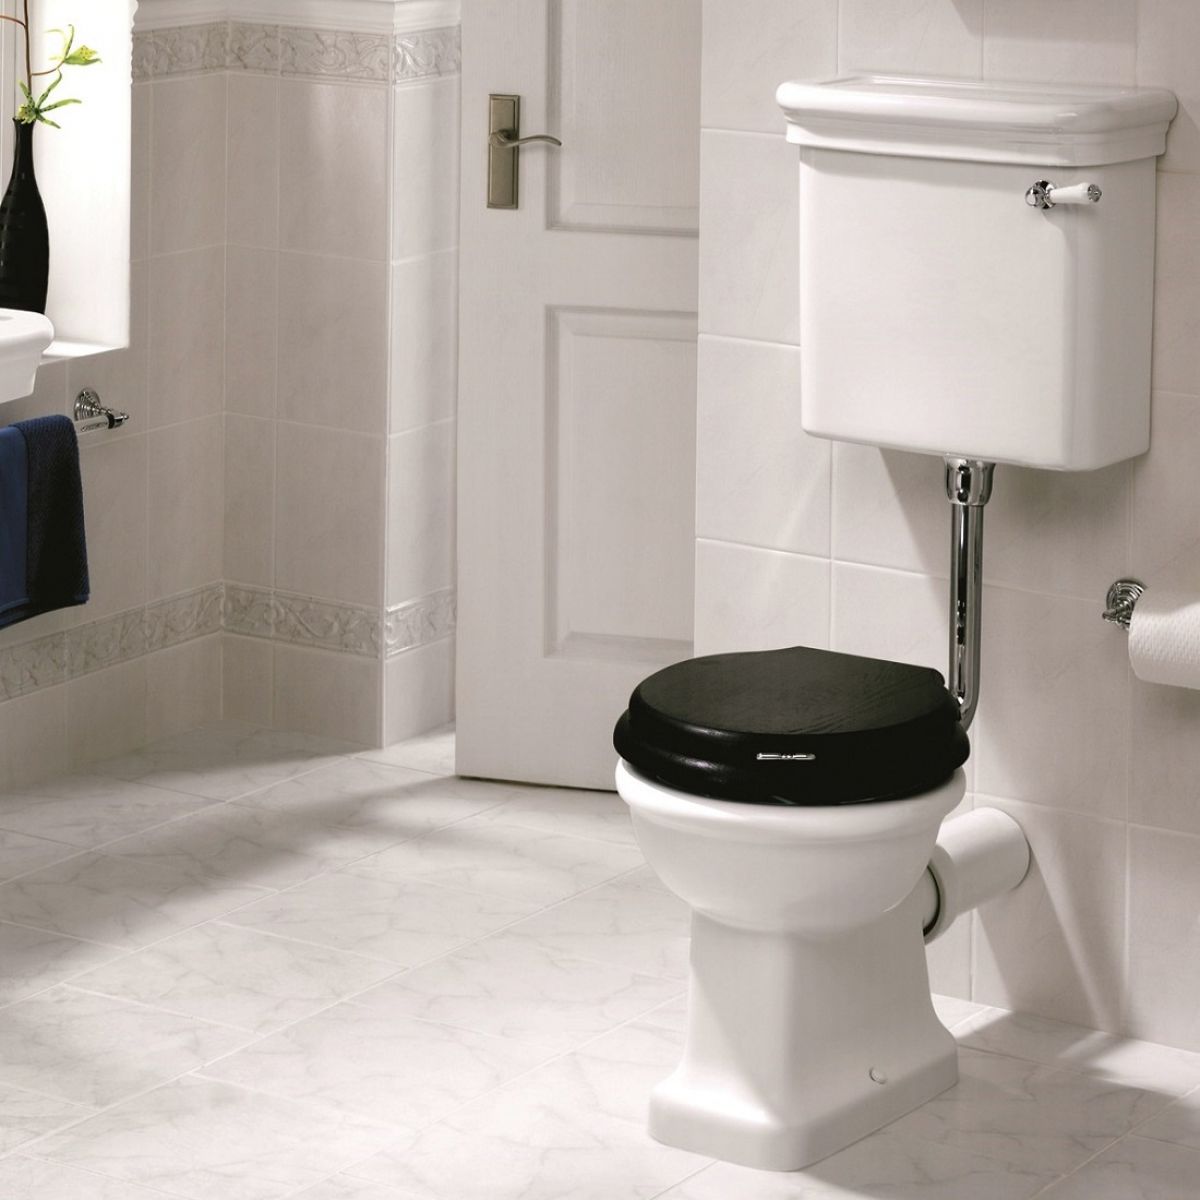 image example of a low level toilet